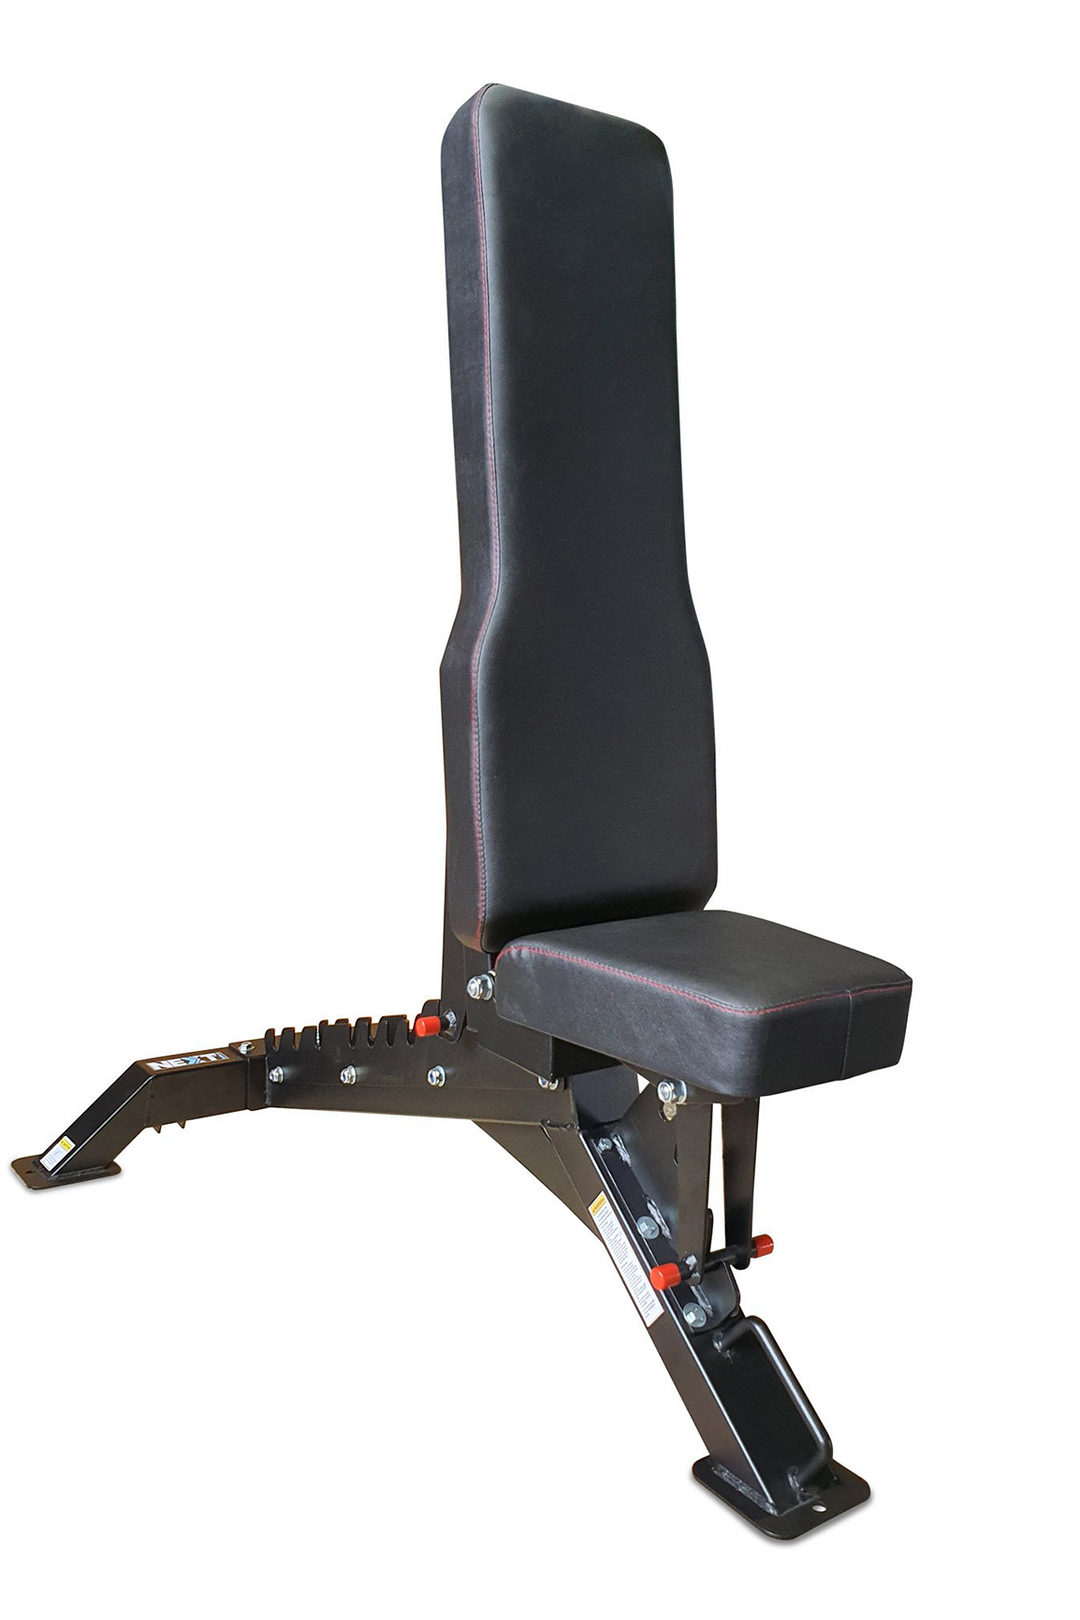 black vinyl weight bench in seated position